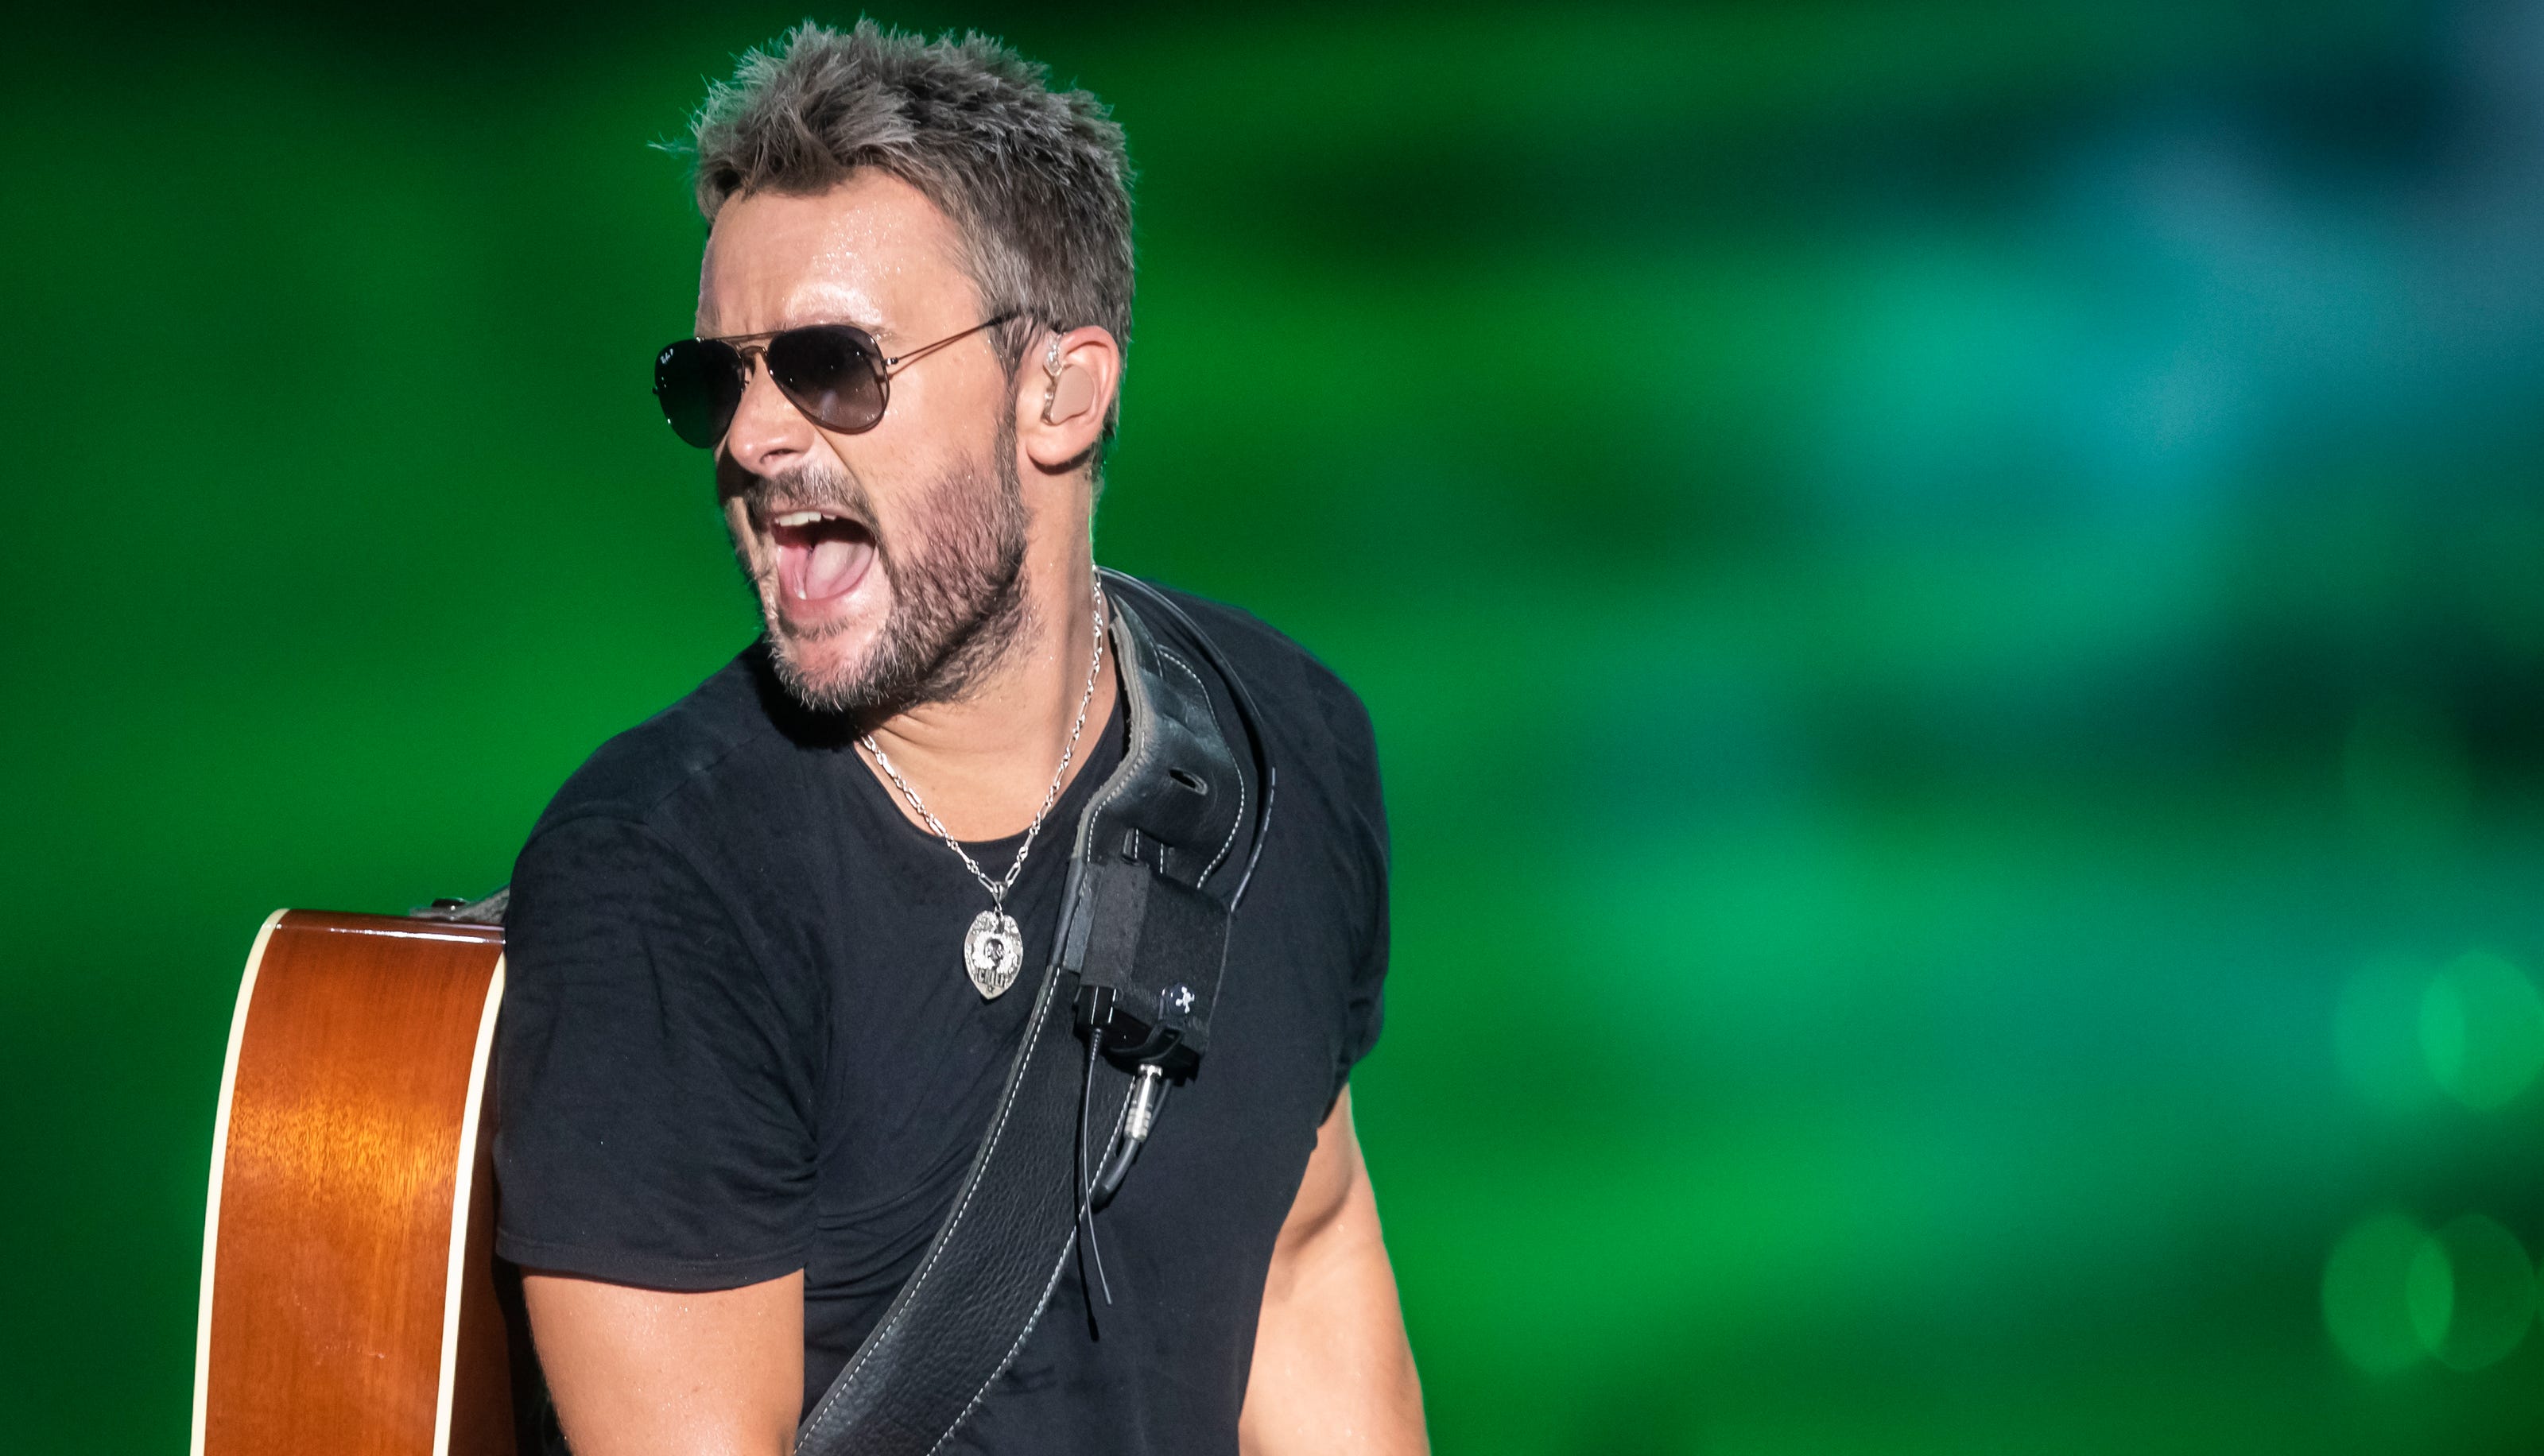 Eric Church in Nashville: "Some Of It" music video debuts at concert